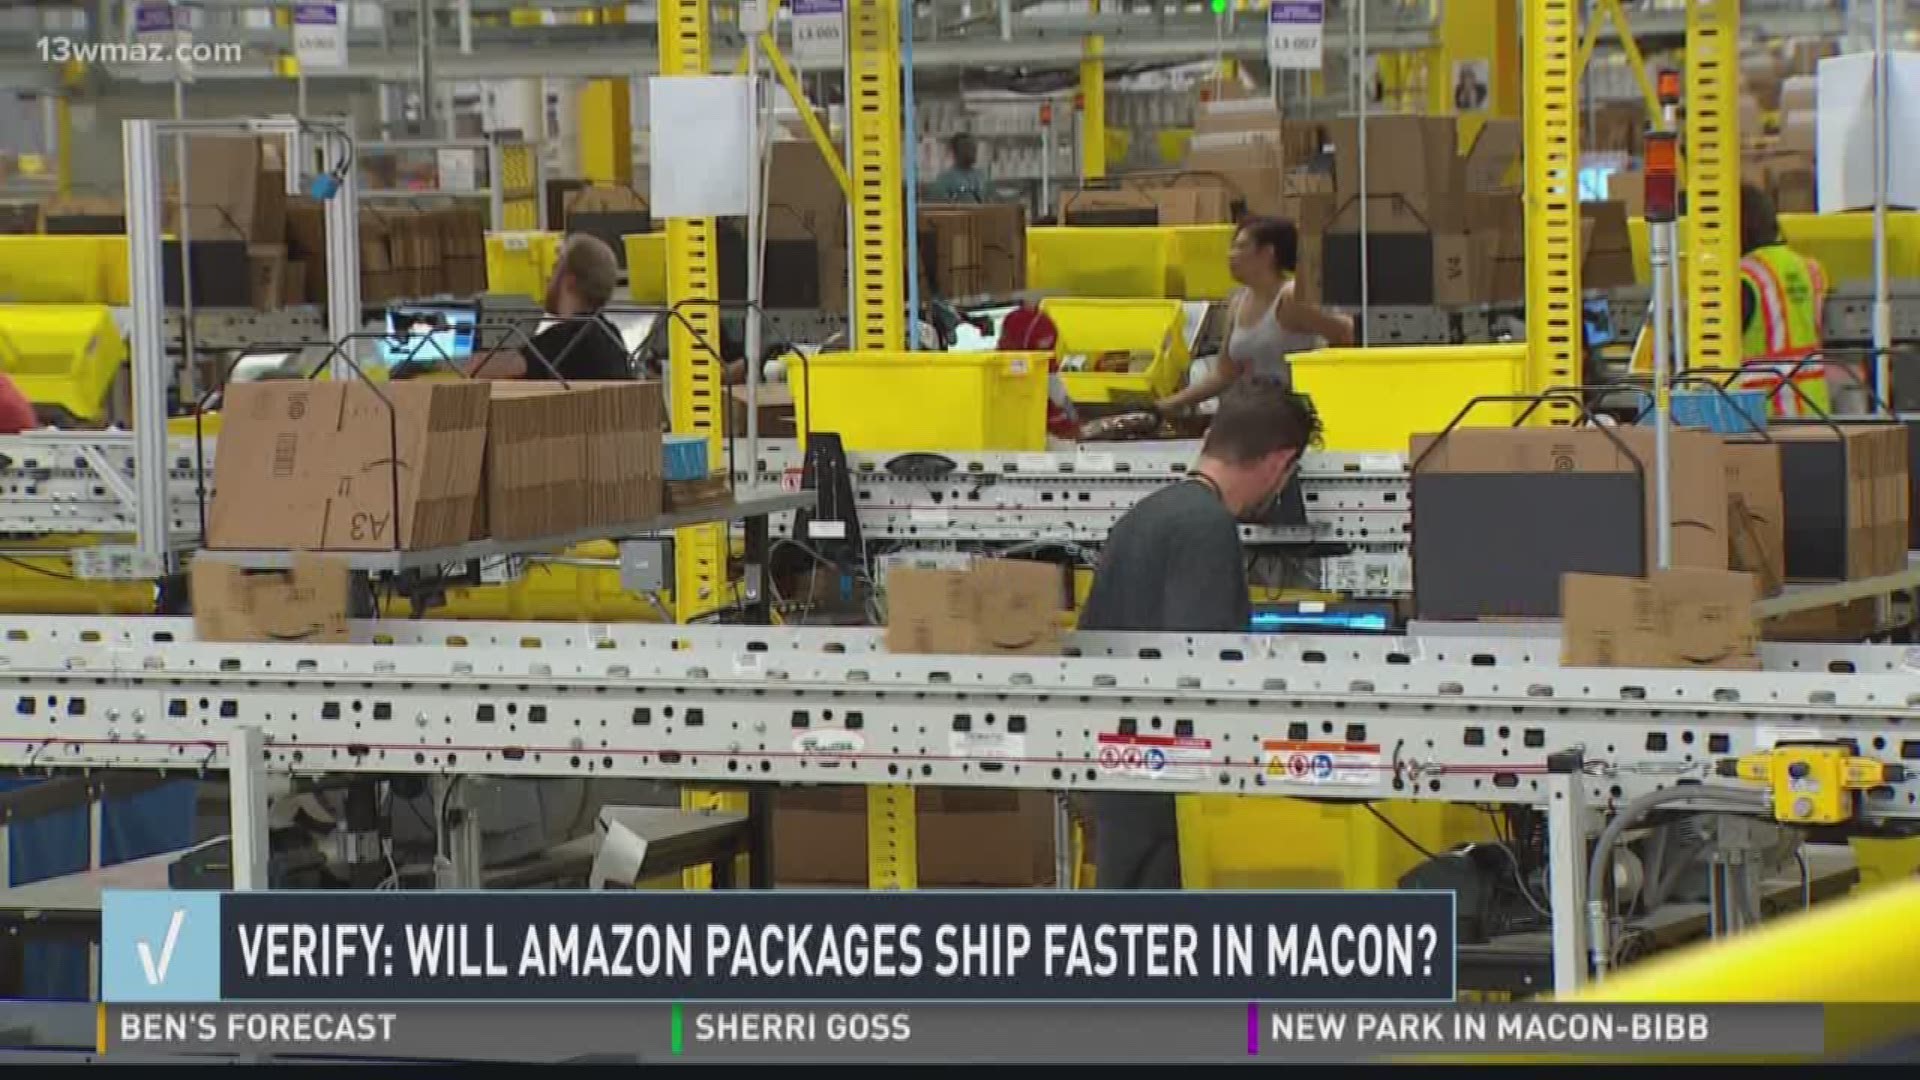 VERIFY: Will Amazon packages ship faster in Macon?